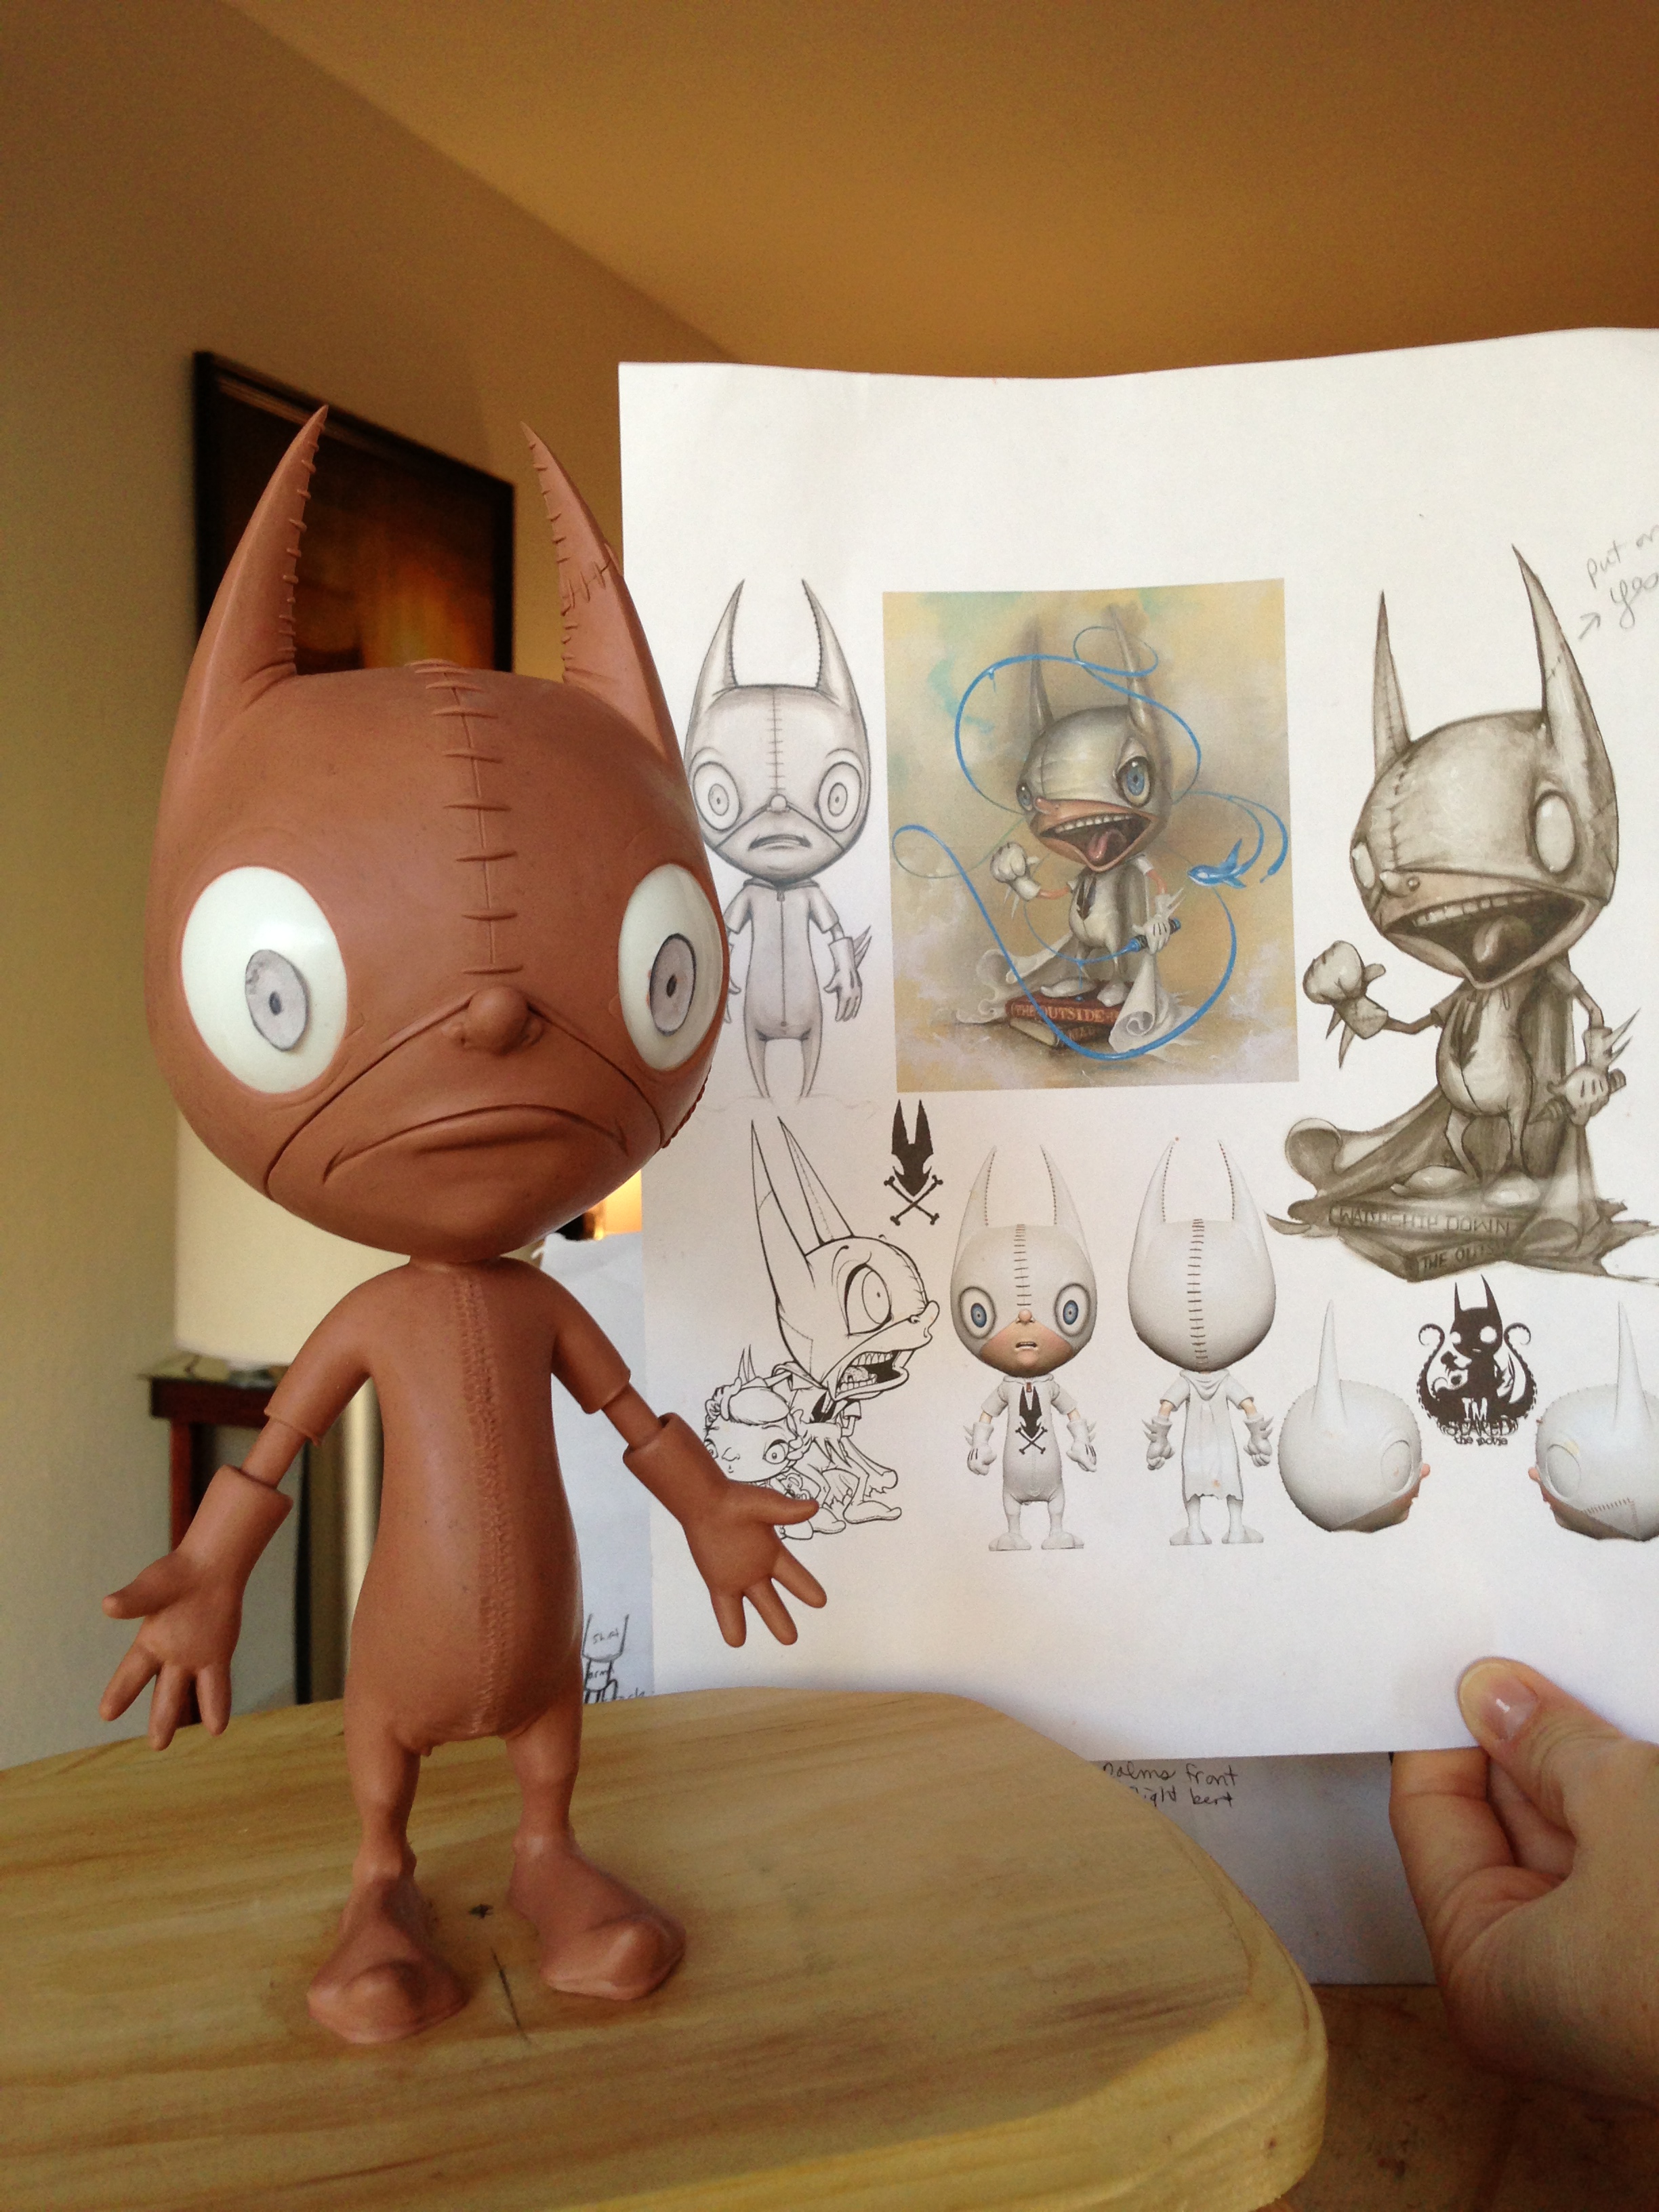   Ralf's sculpt compared to sketches and the vinyl toy design.  